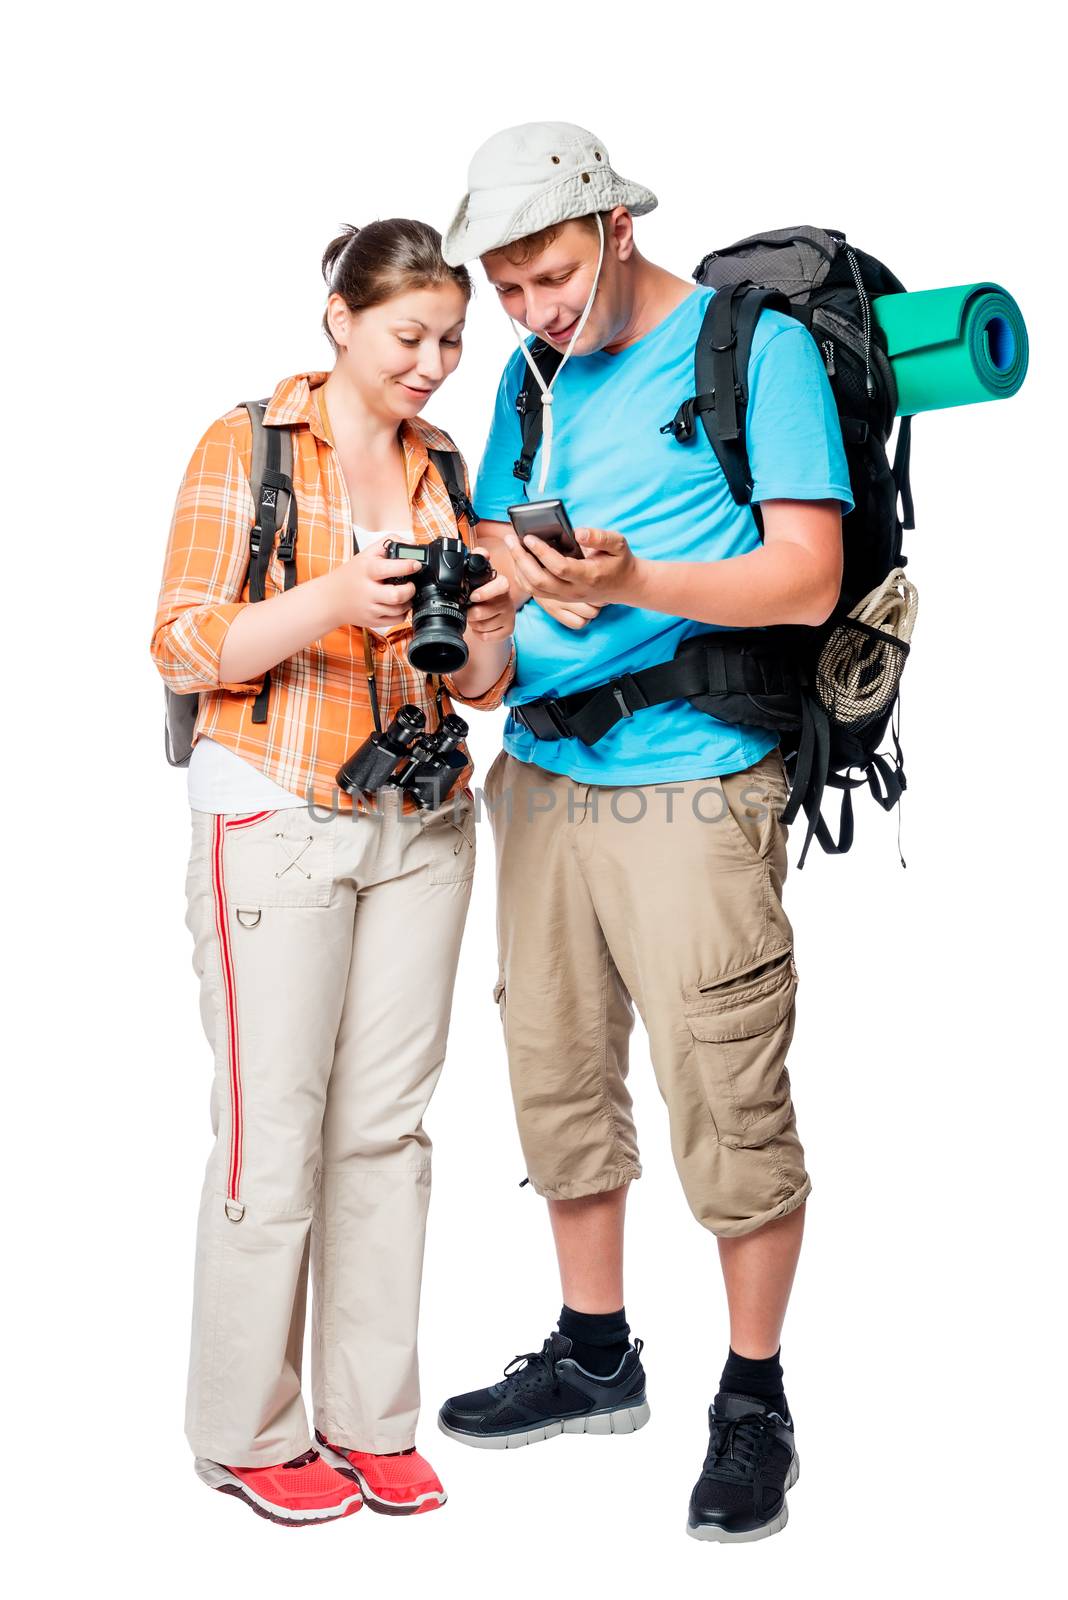 Active tourists with backpacks view photos on camera on white ba by kosmsos111